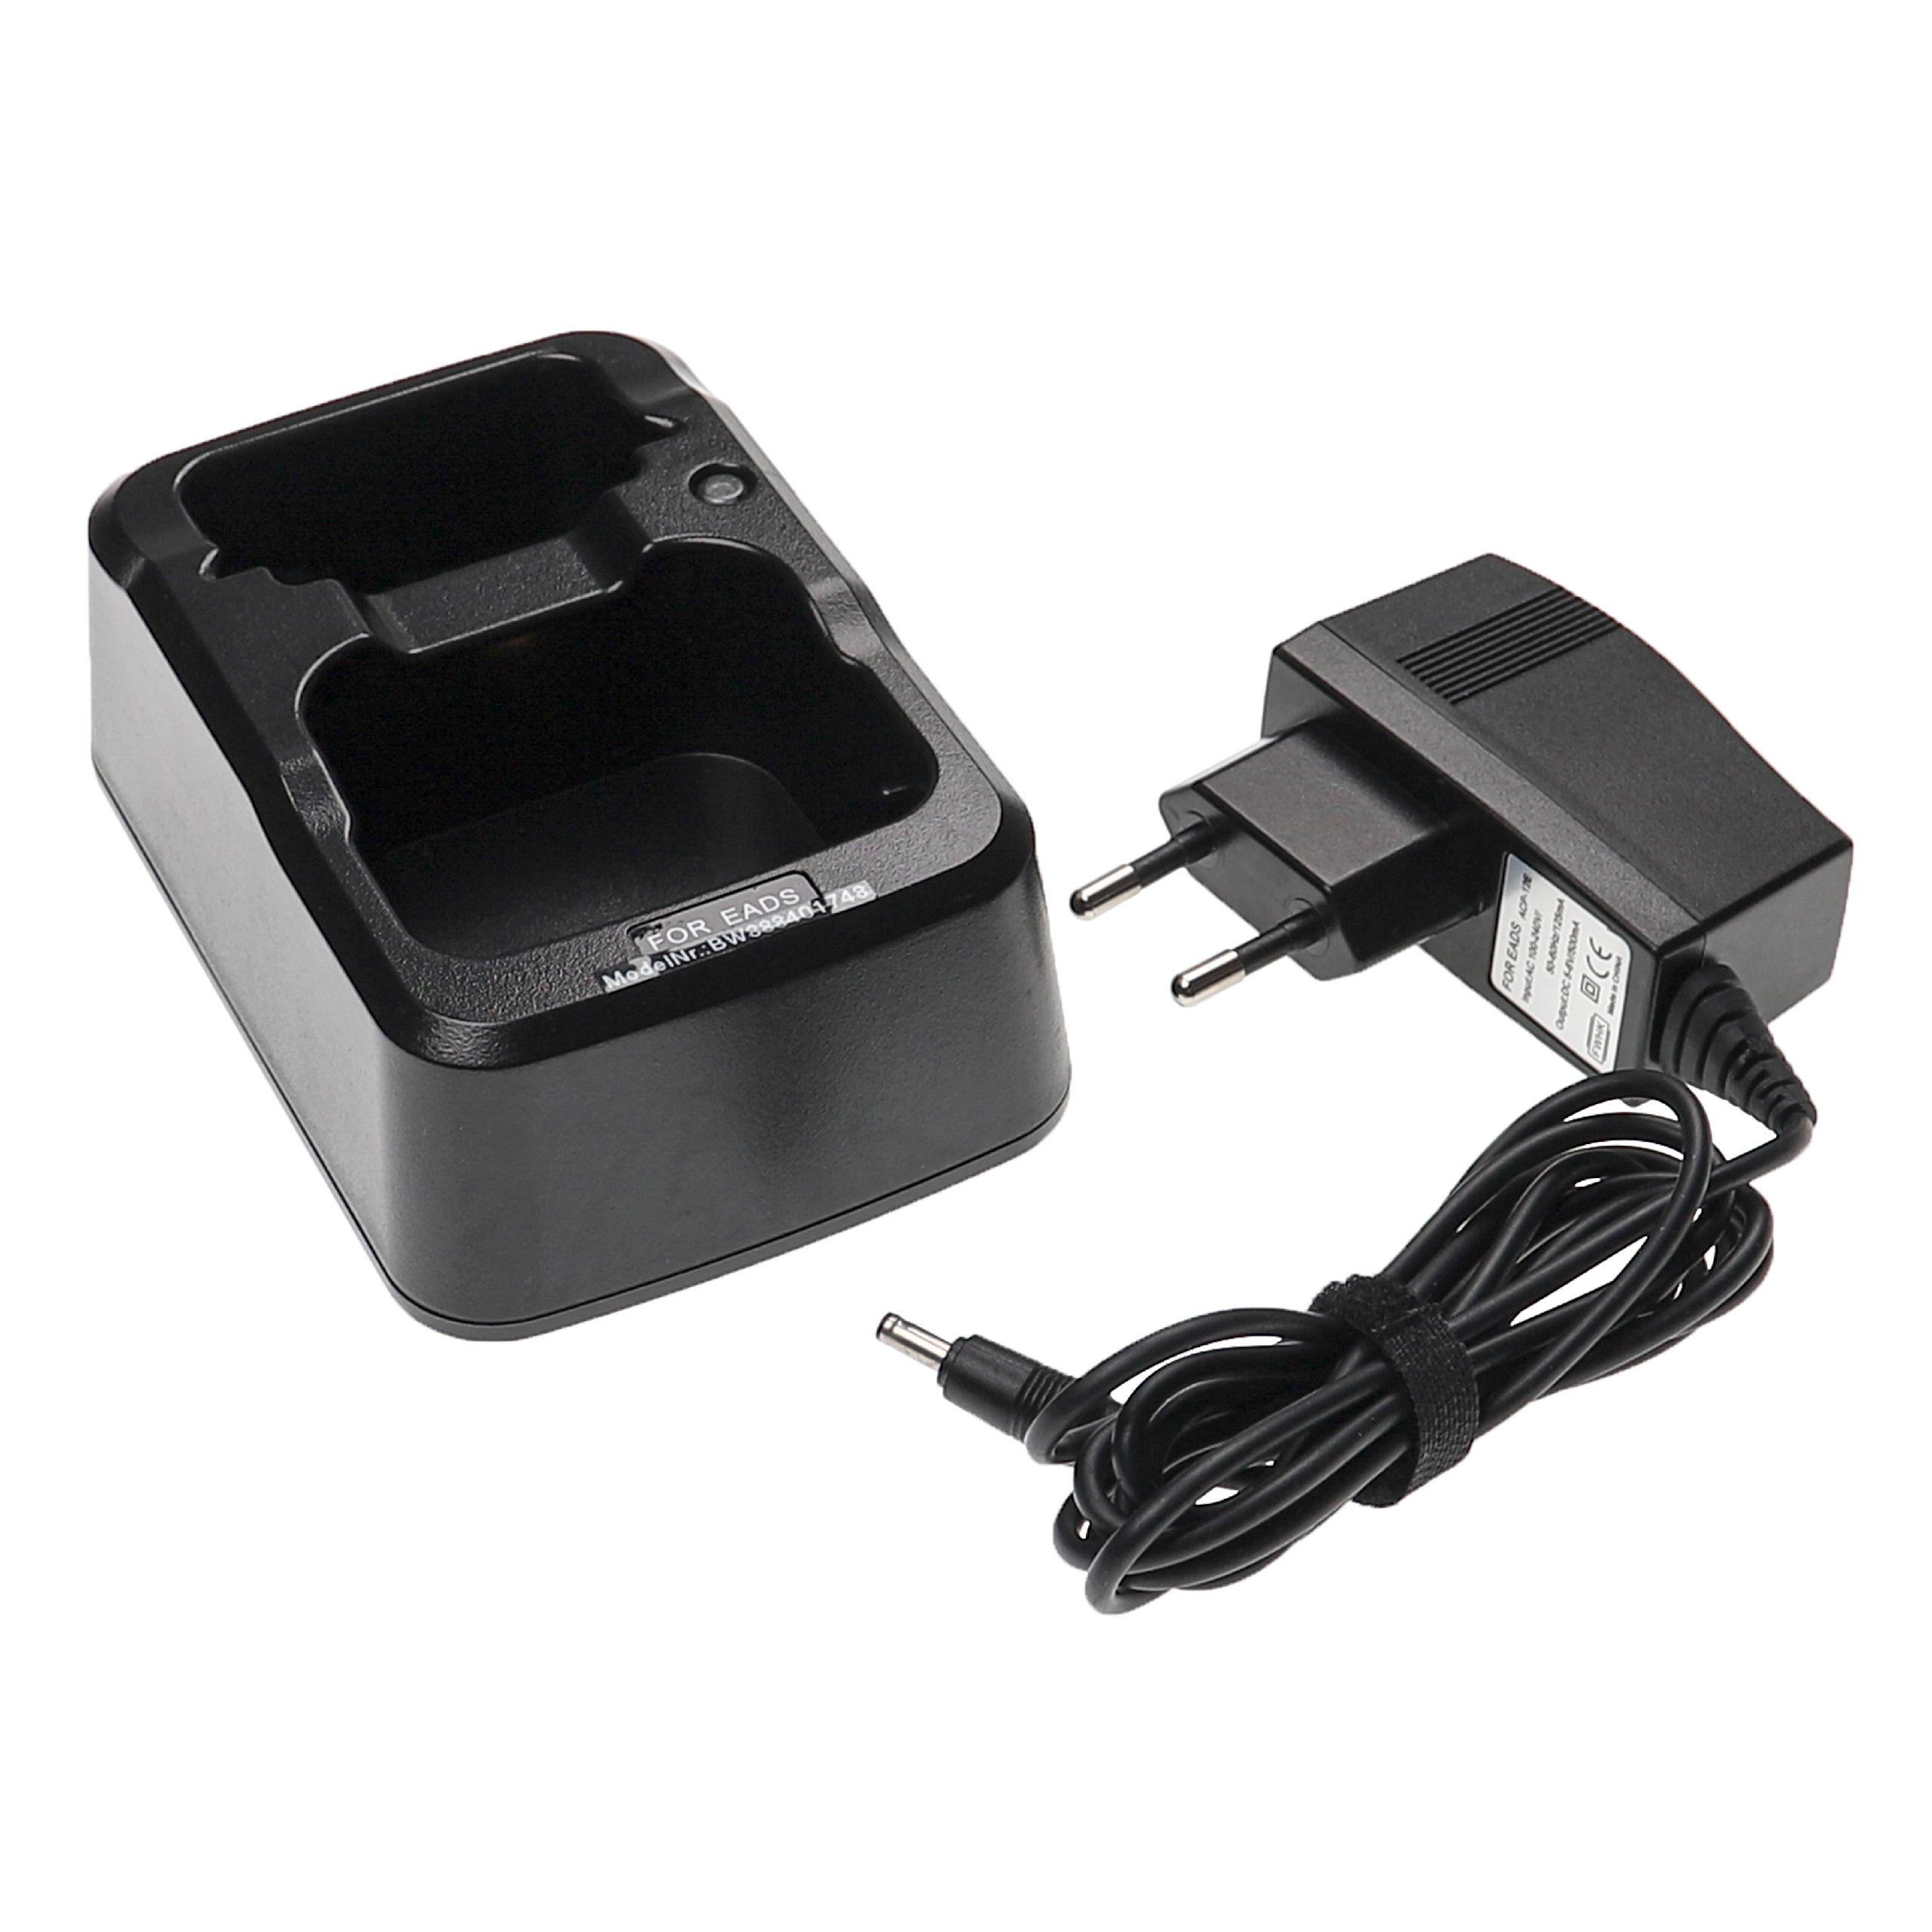 Charger + Mains Adapter Suitable for Airbus Radio Batteries - 4.8 V, 0.5 A